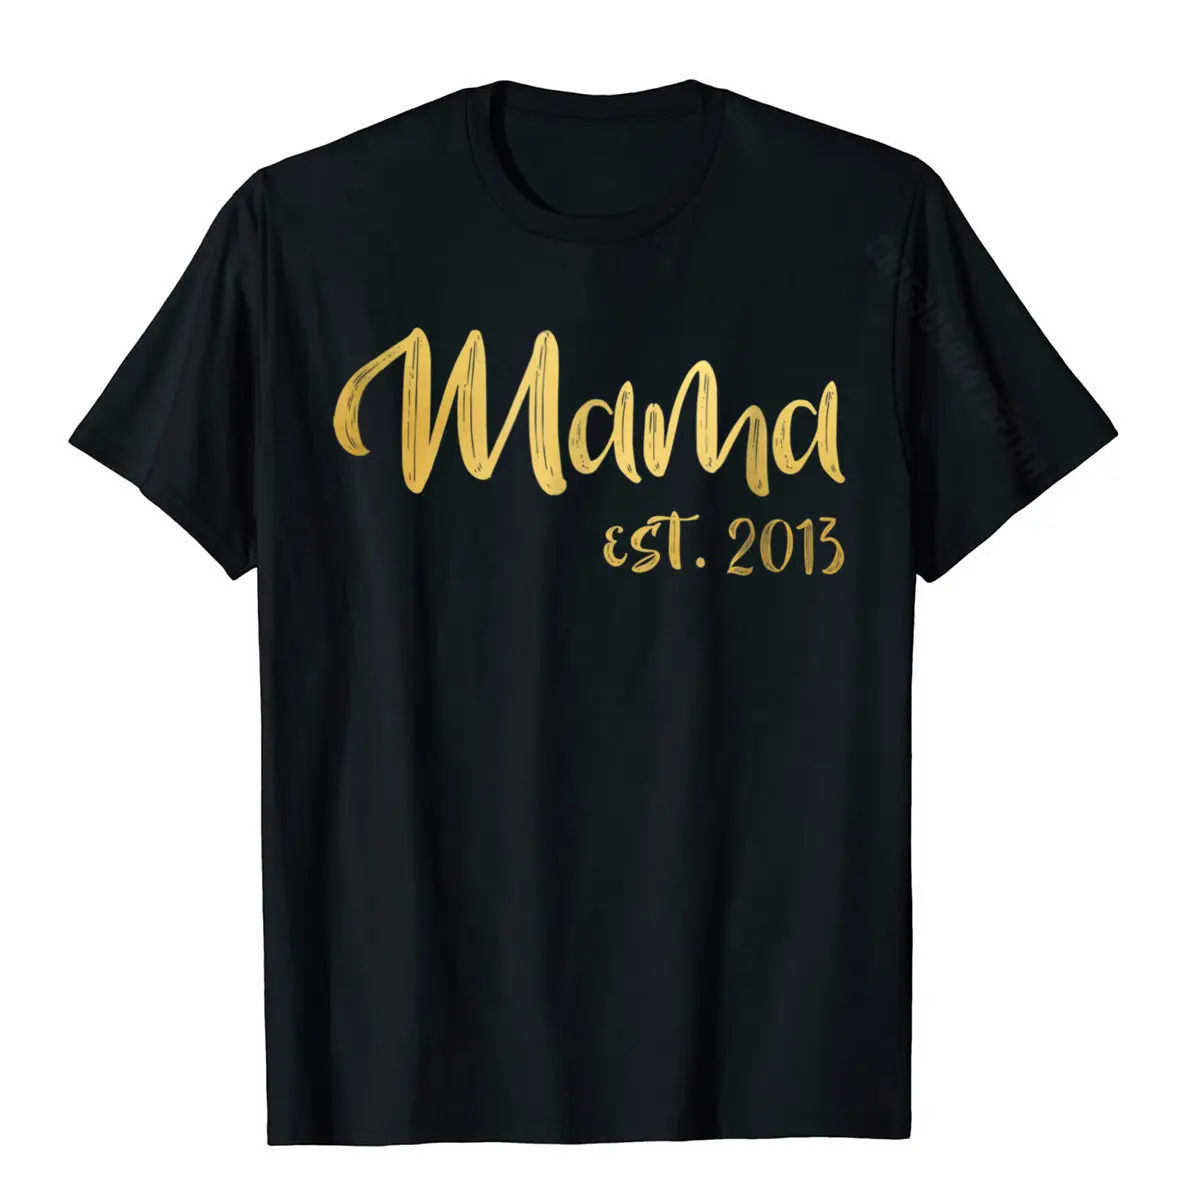 Mothers Day Shirt Mama Est 2013 Gift Shirt For Women Mom Cotton Geek Tops Shirts Discount Mens T Shirts Group